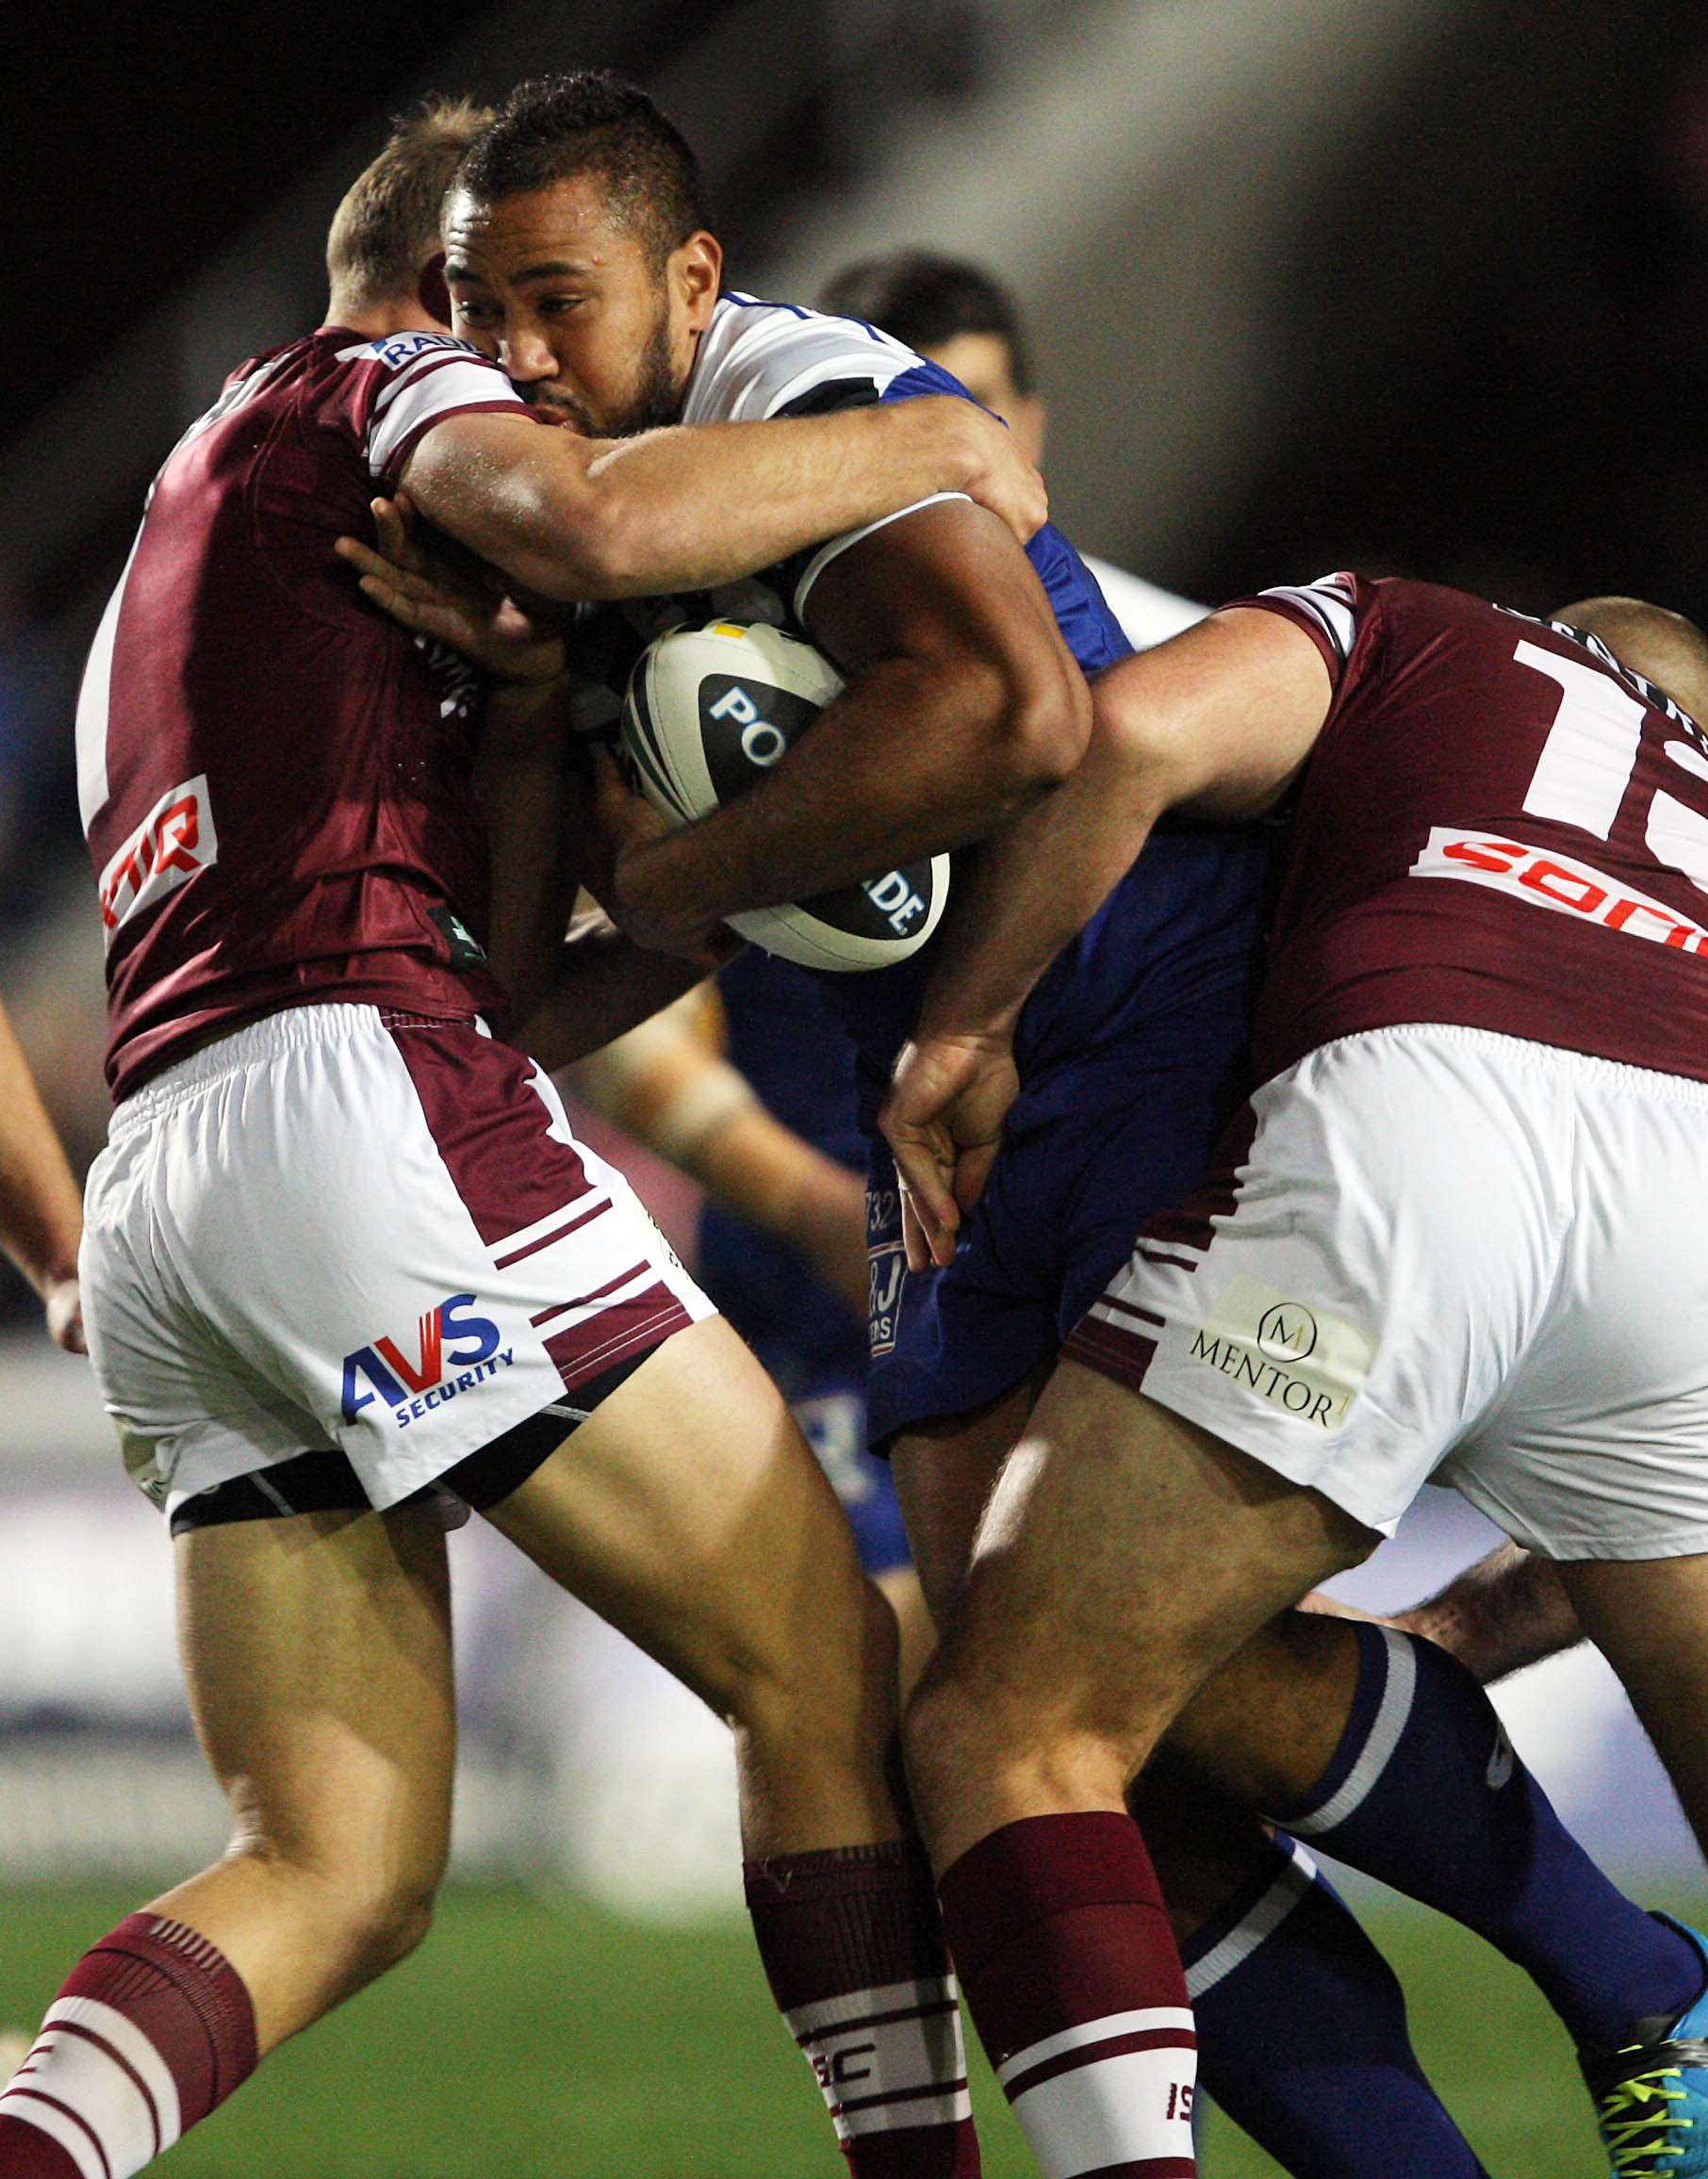 Sea Eagles v Bulldogs, Eels v Cowboys NRL round 13 streaming and score updates